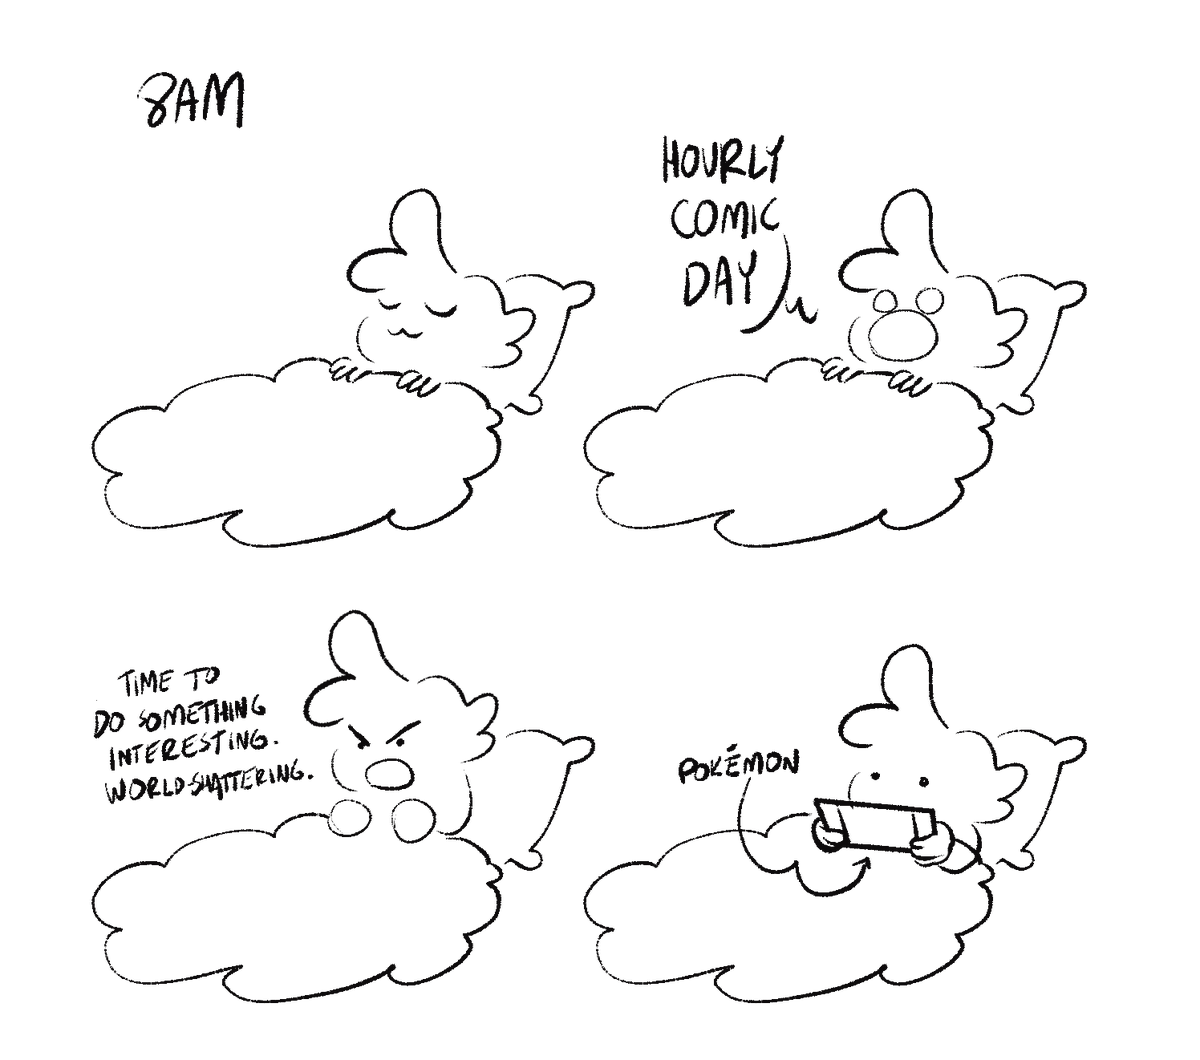 HOURLY COMICS!! 8AM: an essential start to the day!  #hourlycomicday #hourlycomicday2022 